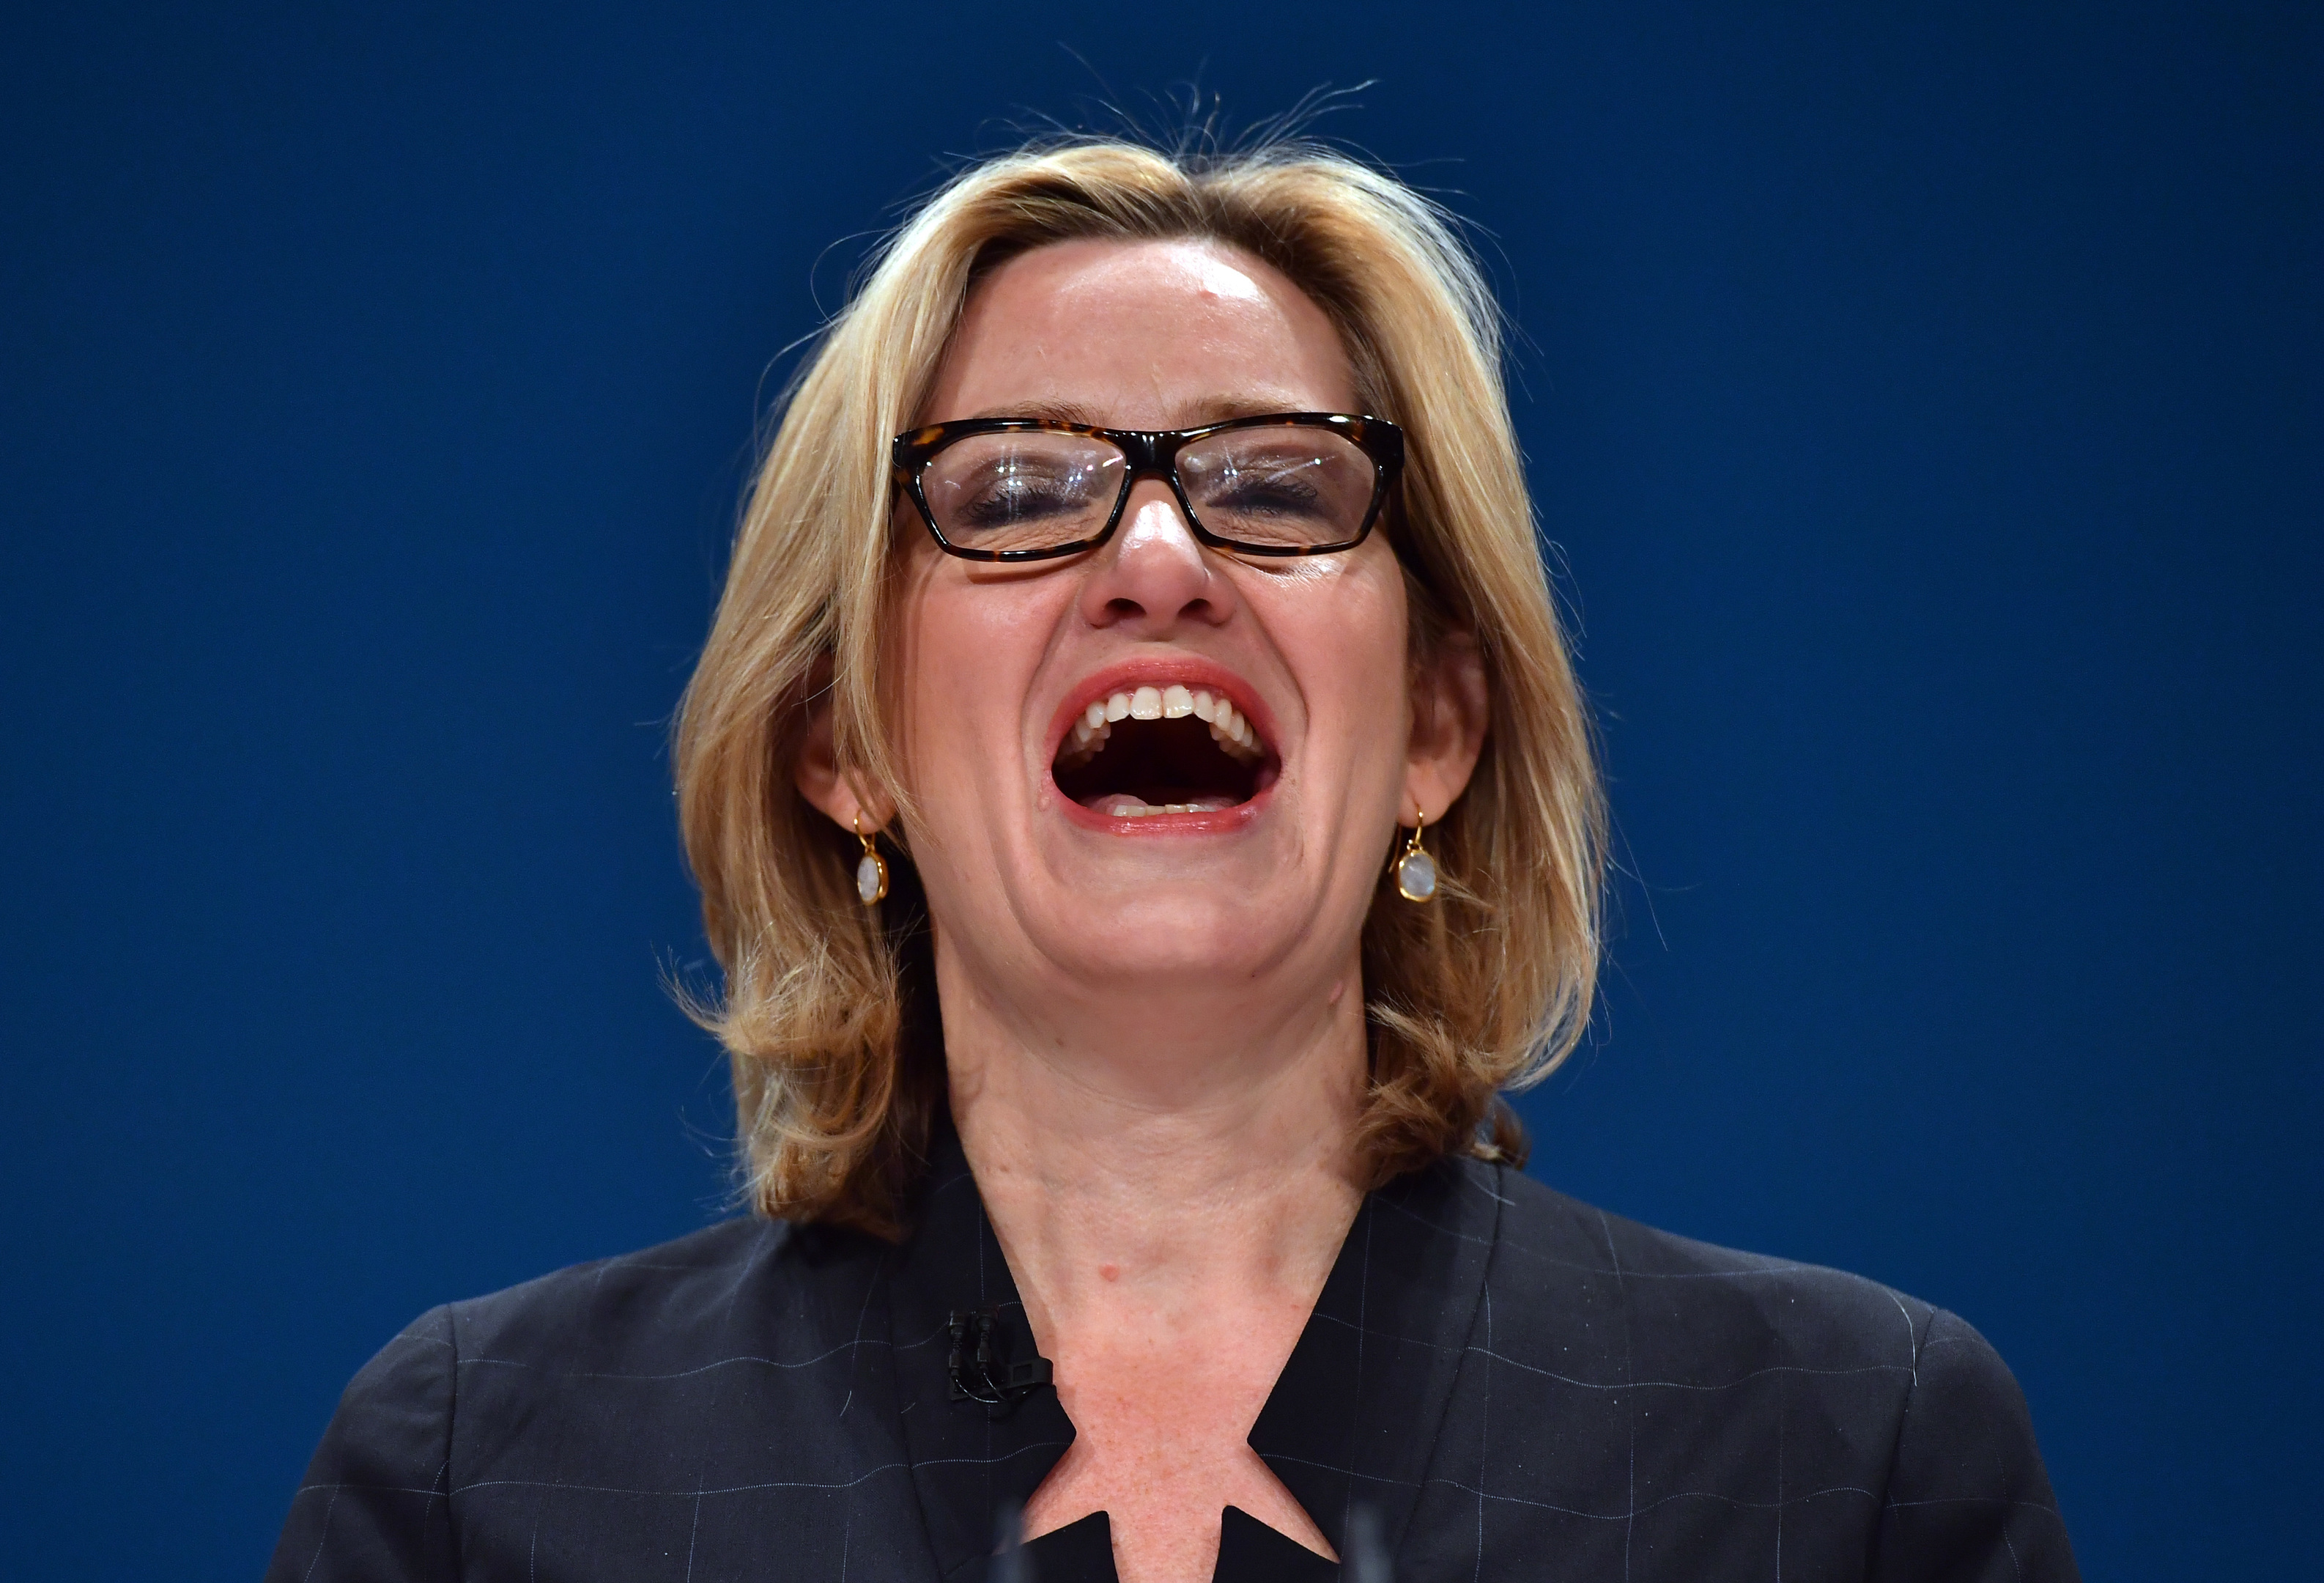 Amber Rudd delivers a her first speech as Home Secretary.